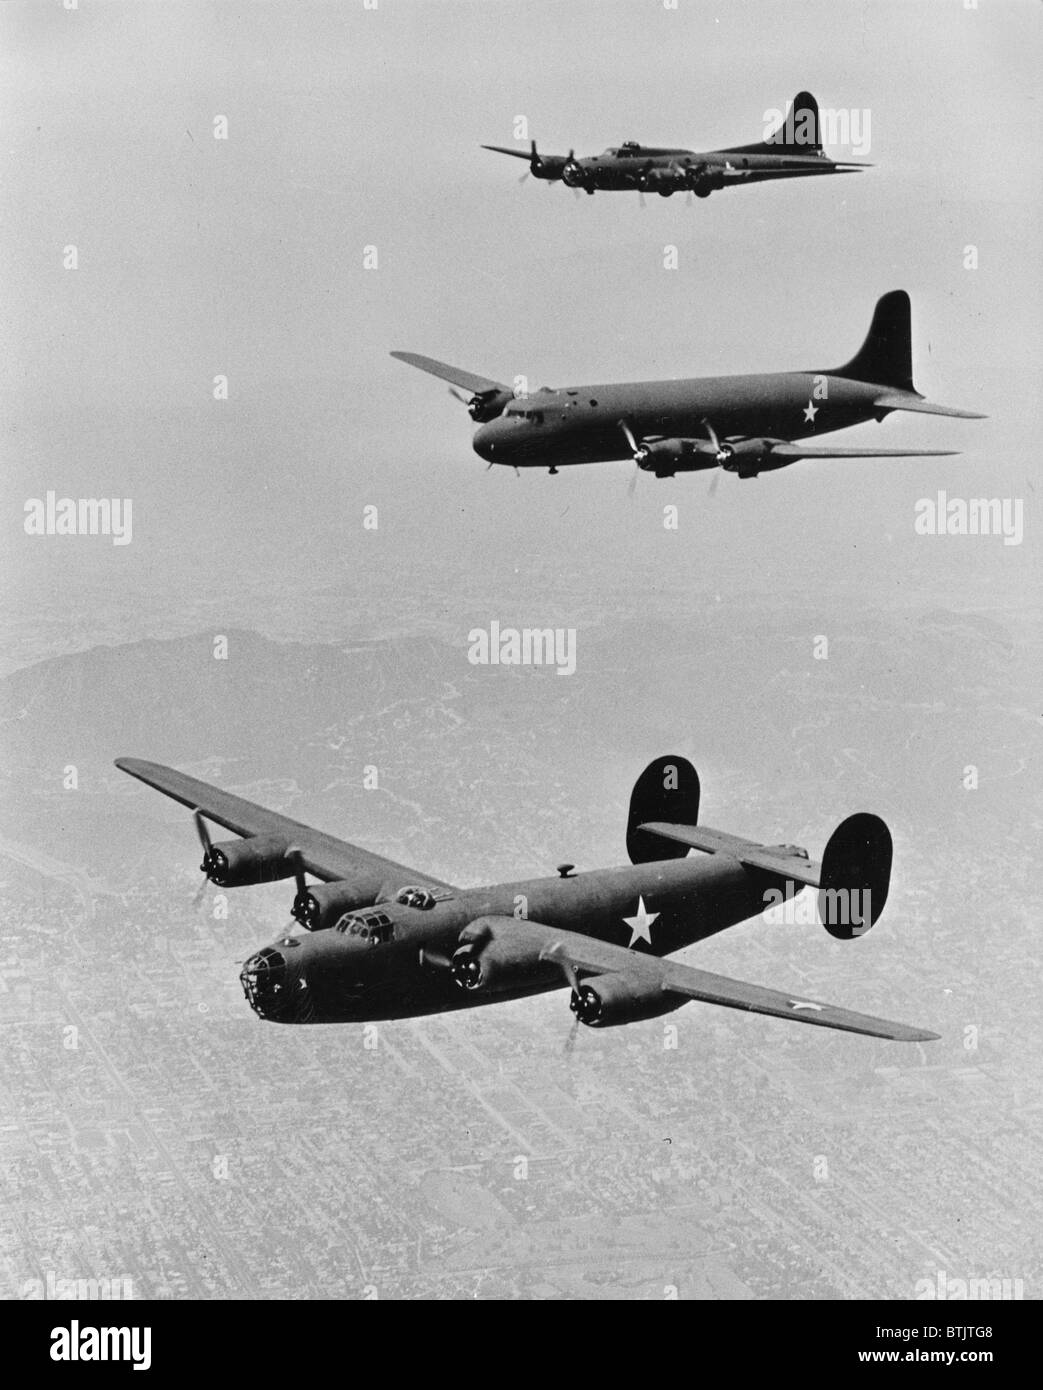 World War II, United States planes in echelon formation, from the top: Boeing Flying Fortress B17, Douglas Transport, Consolidated Liberator B-24, circa 1942. Stock Photo